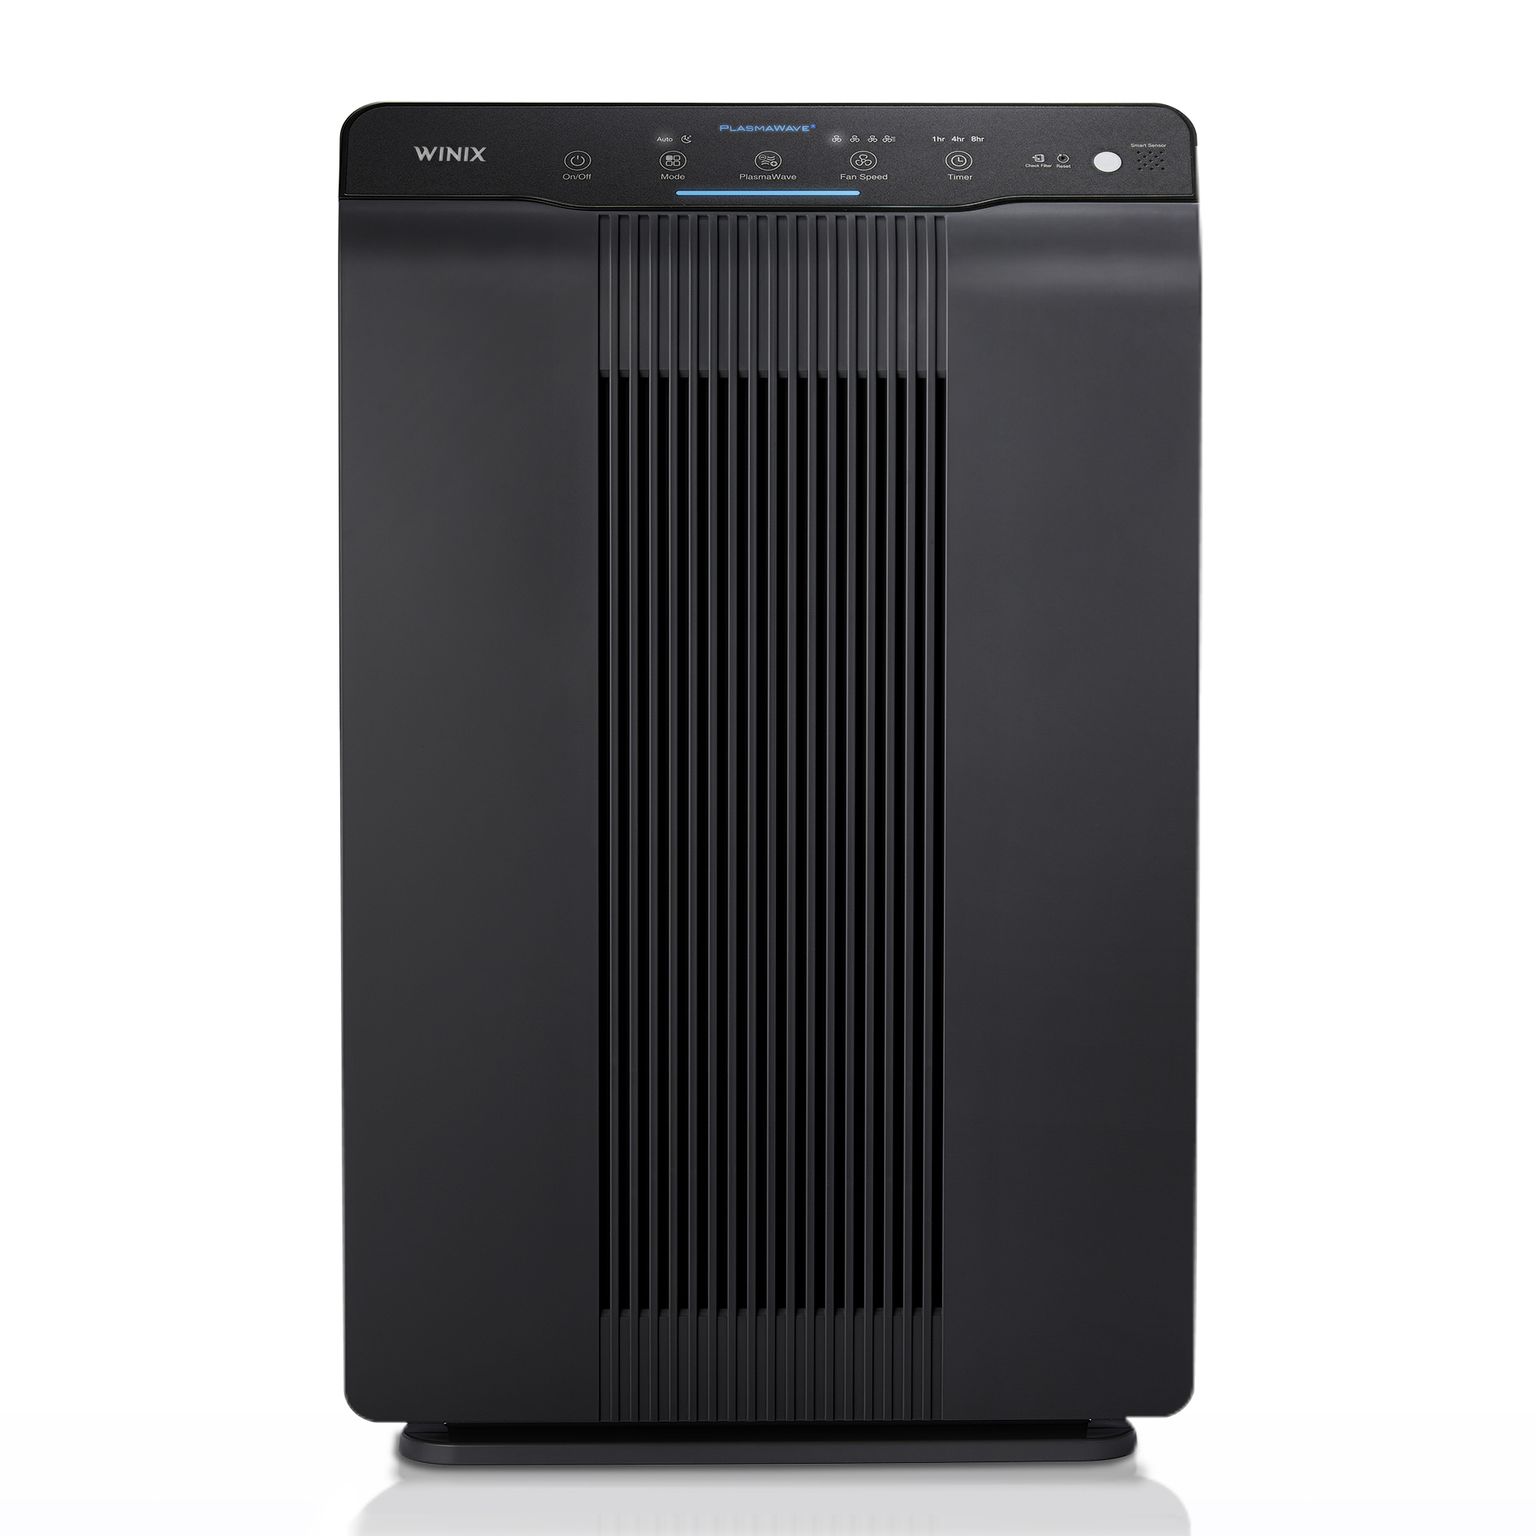 Winix 5500-2 Air Purifier with True HEPA for Particles, PlasmaWave and Odor Reducing Washable AOC Carbon Filter. AHAM Verified for 360 sq ft, Max Room Capacity of 1728 sq ft - image 1 of 7